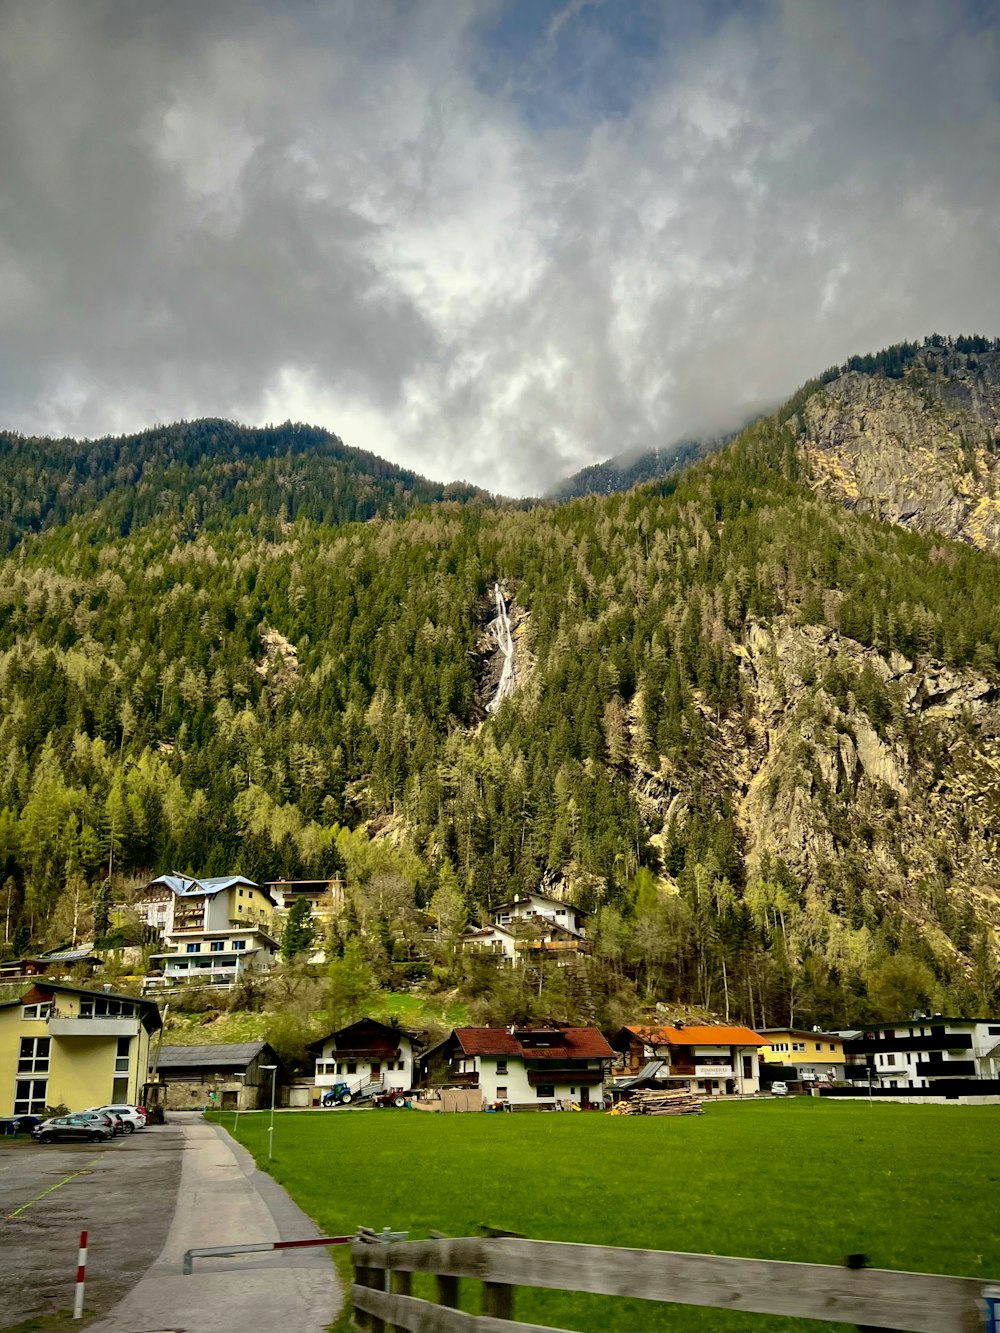 a scenic view of a mountain with houses and trees